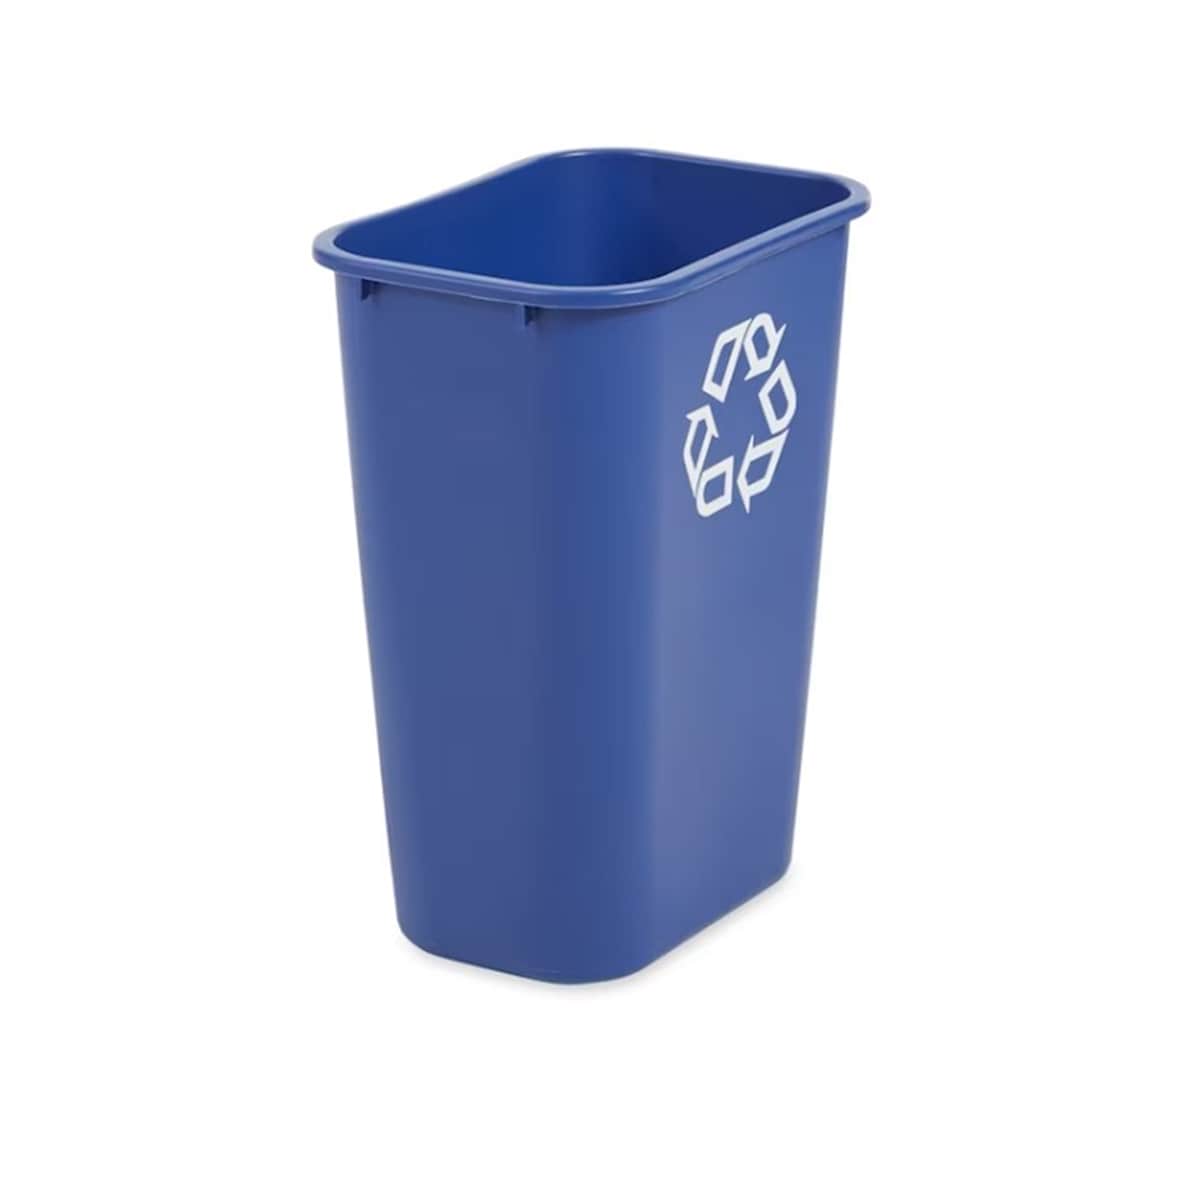 How to recycle plastic storage bins – RecycleNation